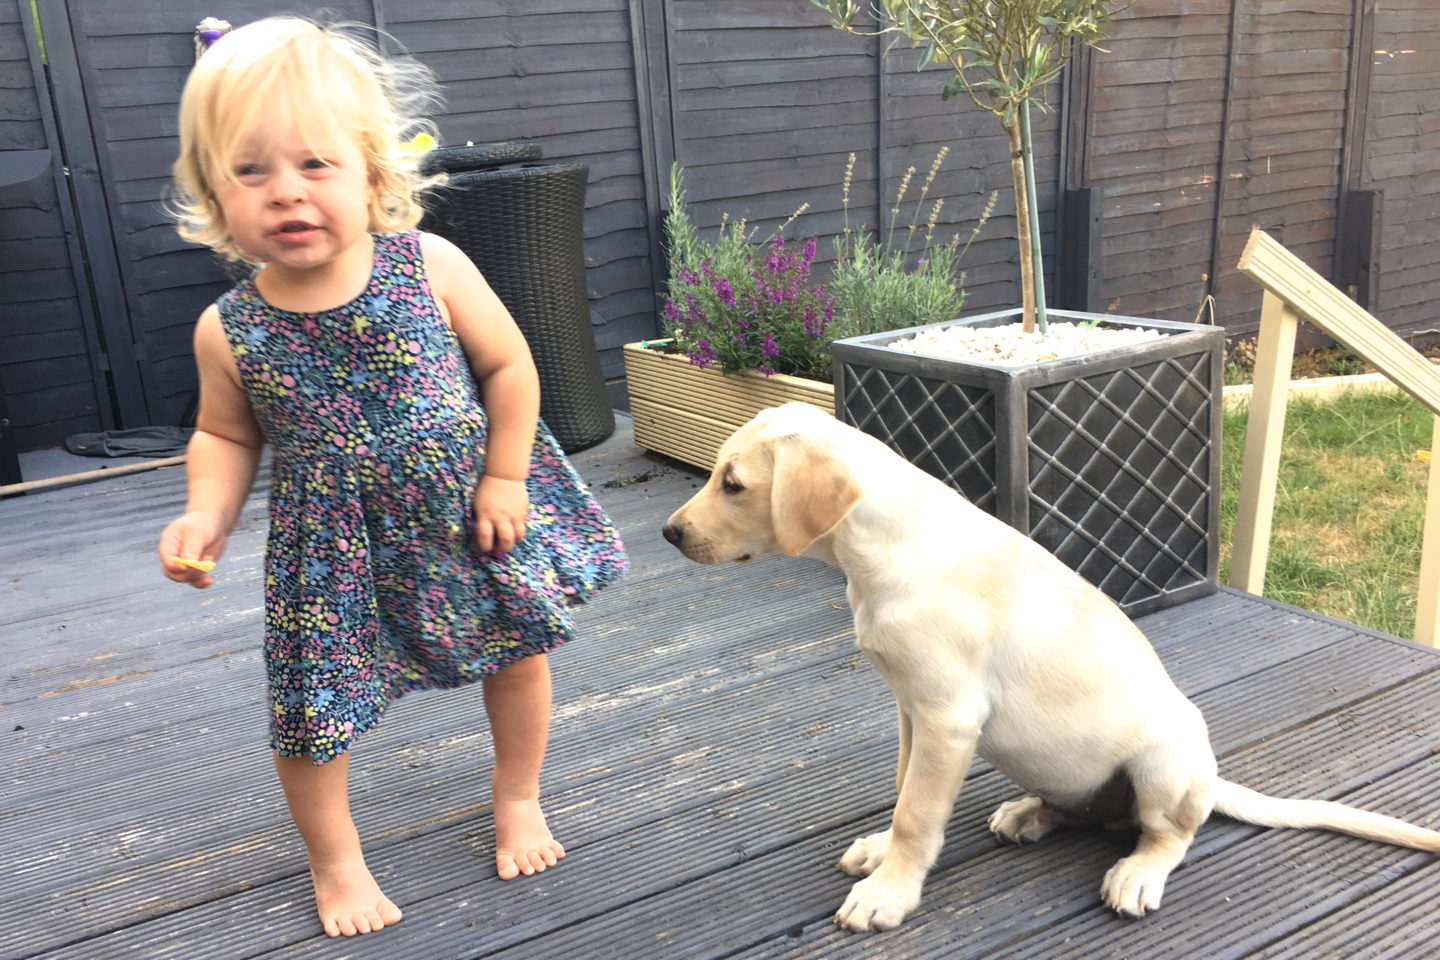 18 month old girl dancing with yellow labrador puppy